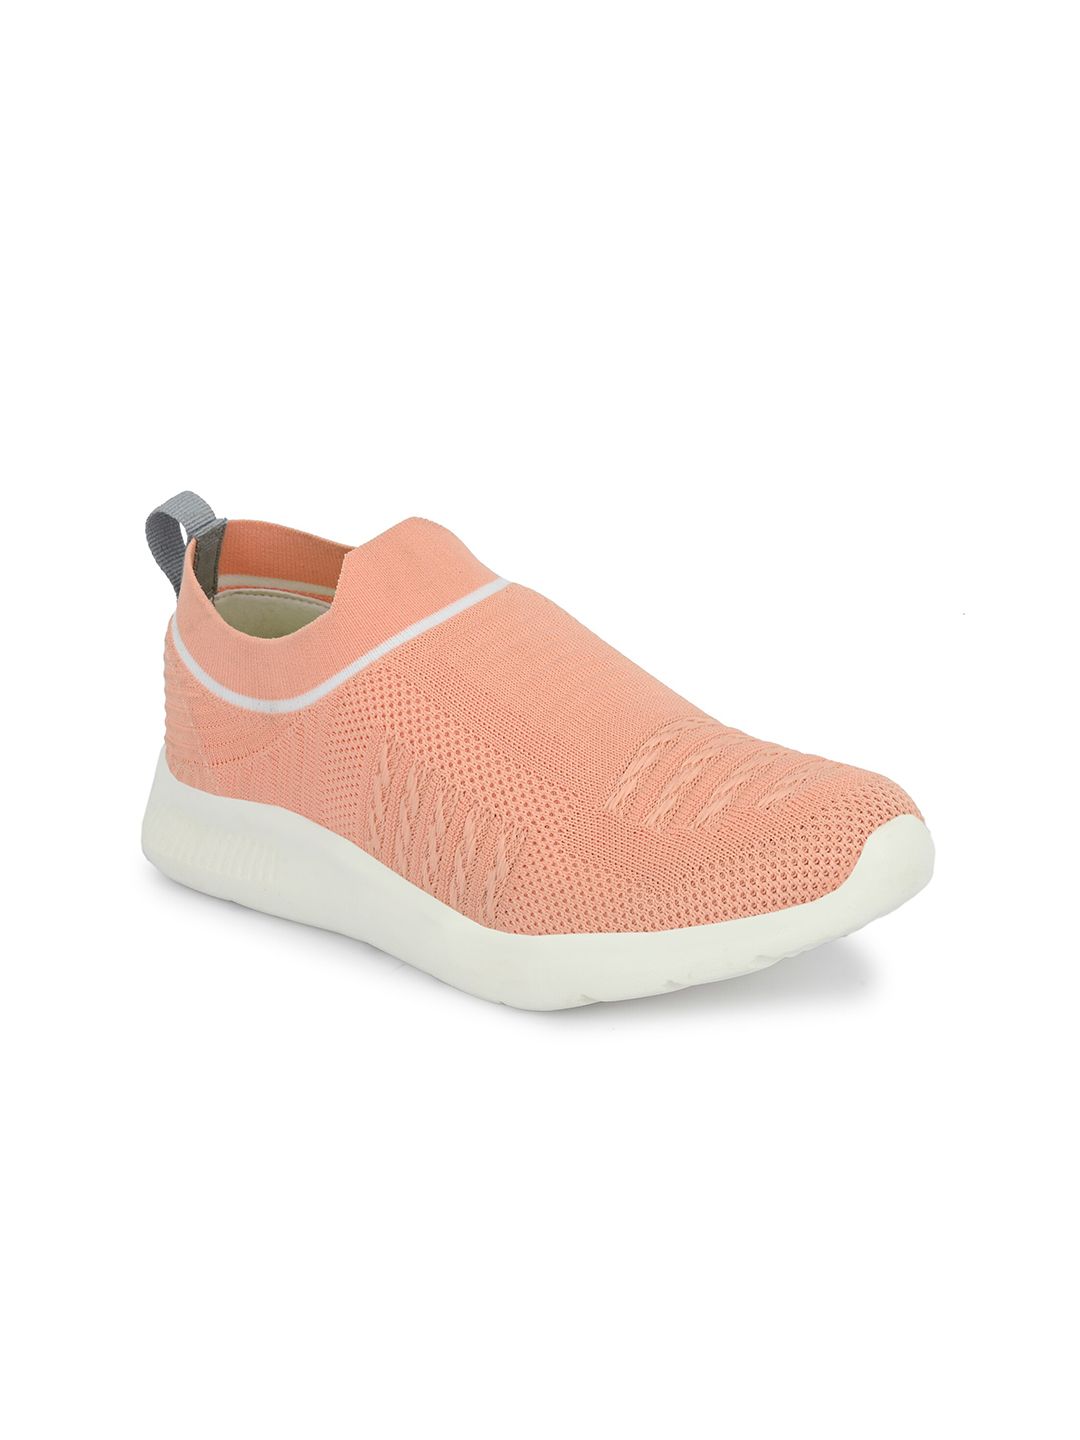 OFF LIMITS Women Peach-Coloured Mesh Walking Non-Marking Shoes Price in India